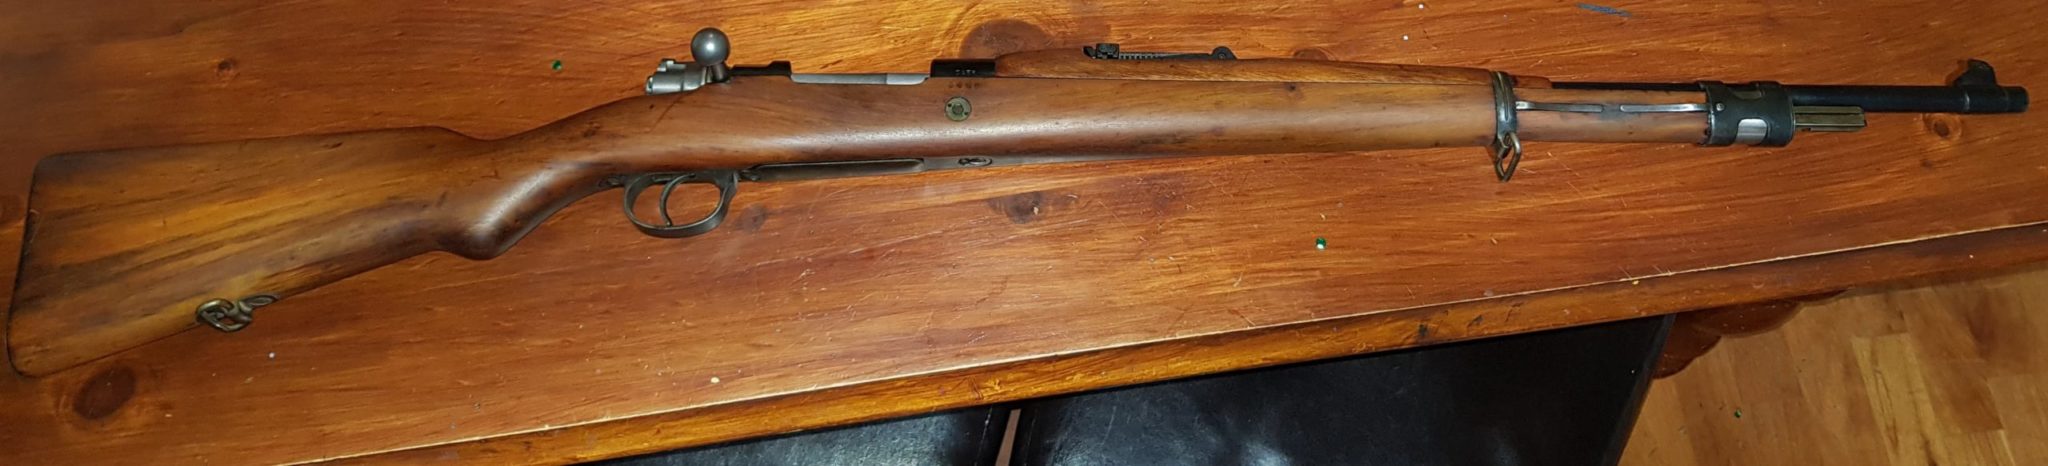 mauser 98 serial number locations